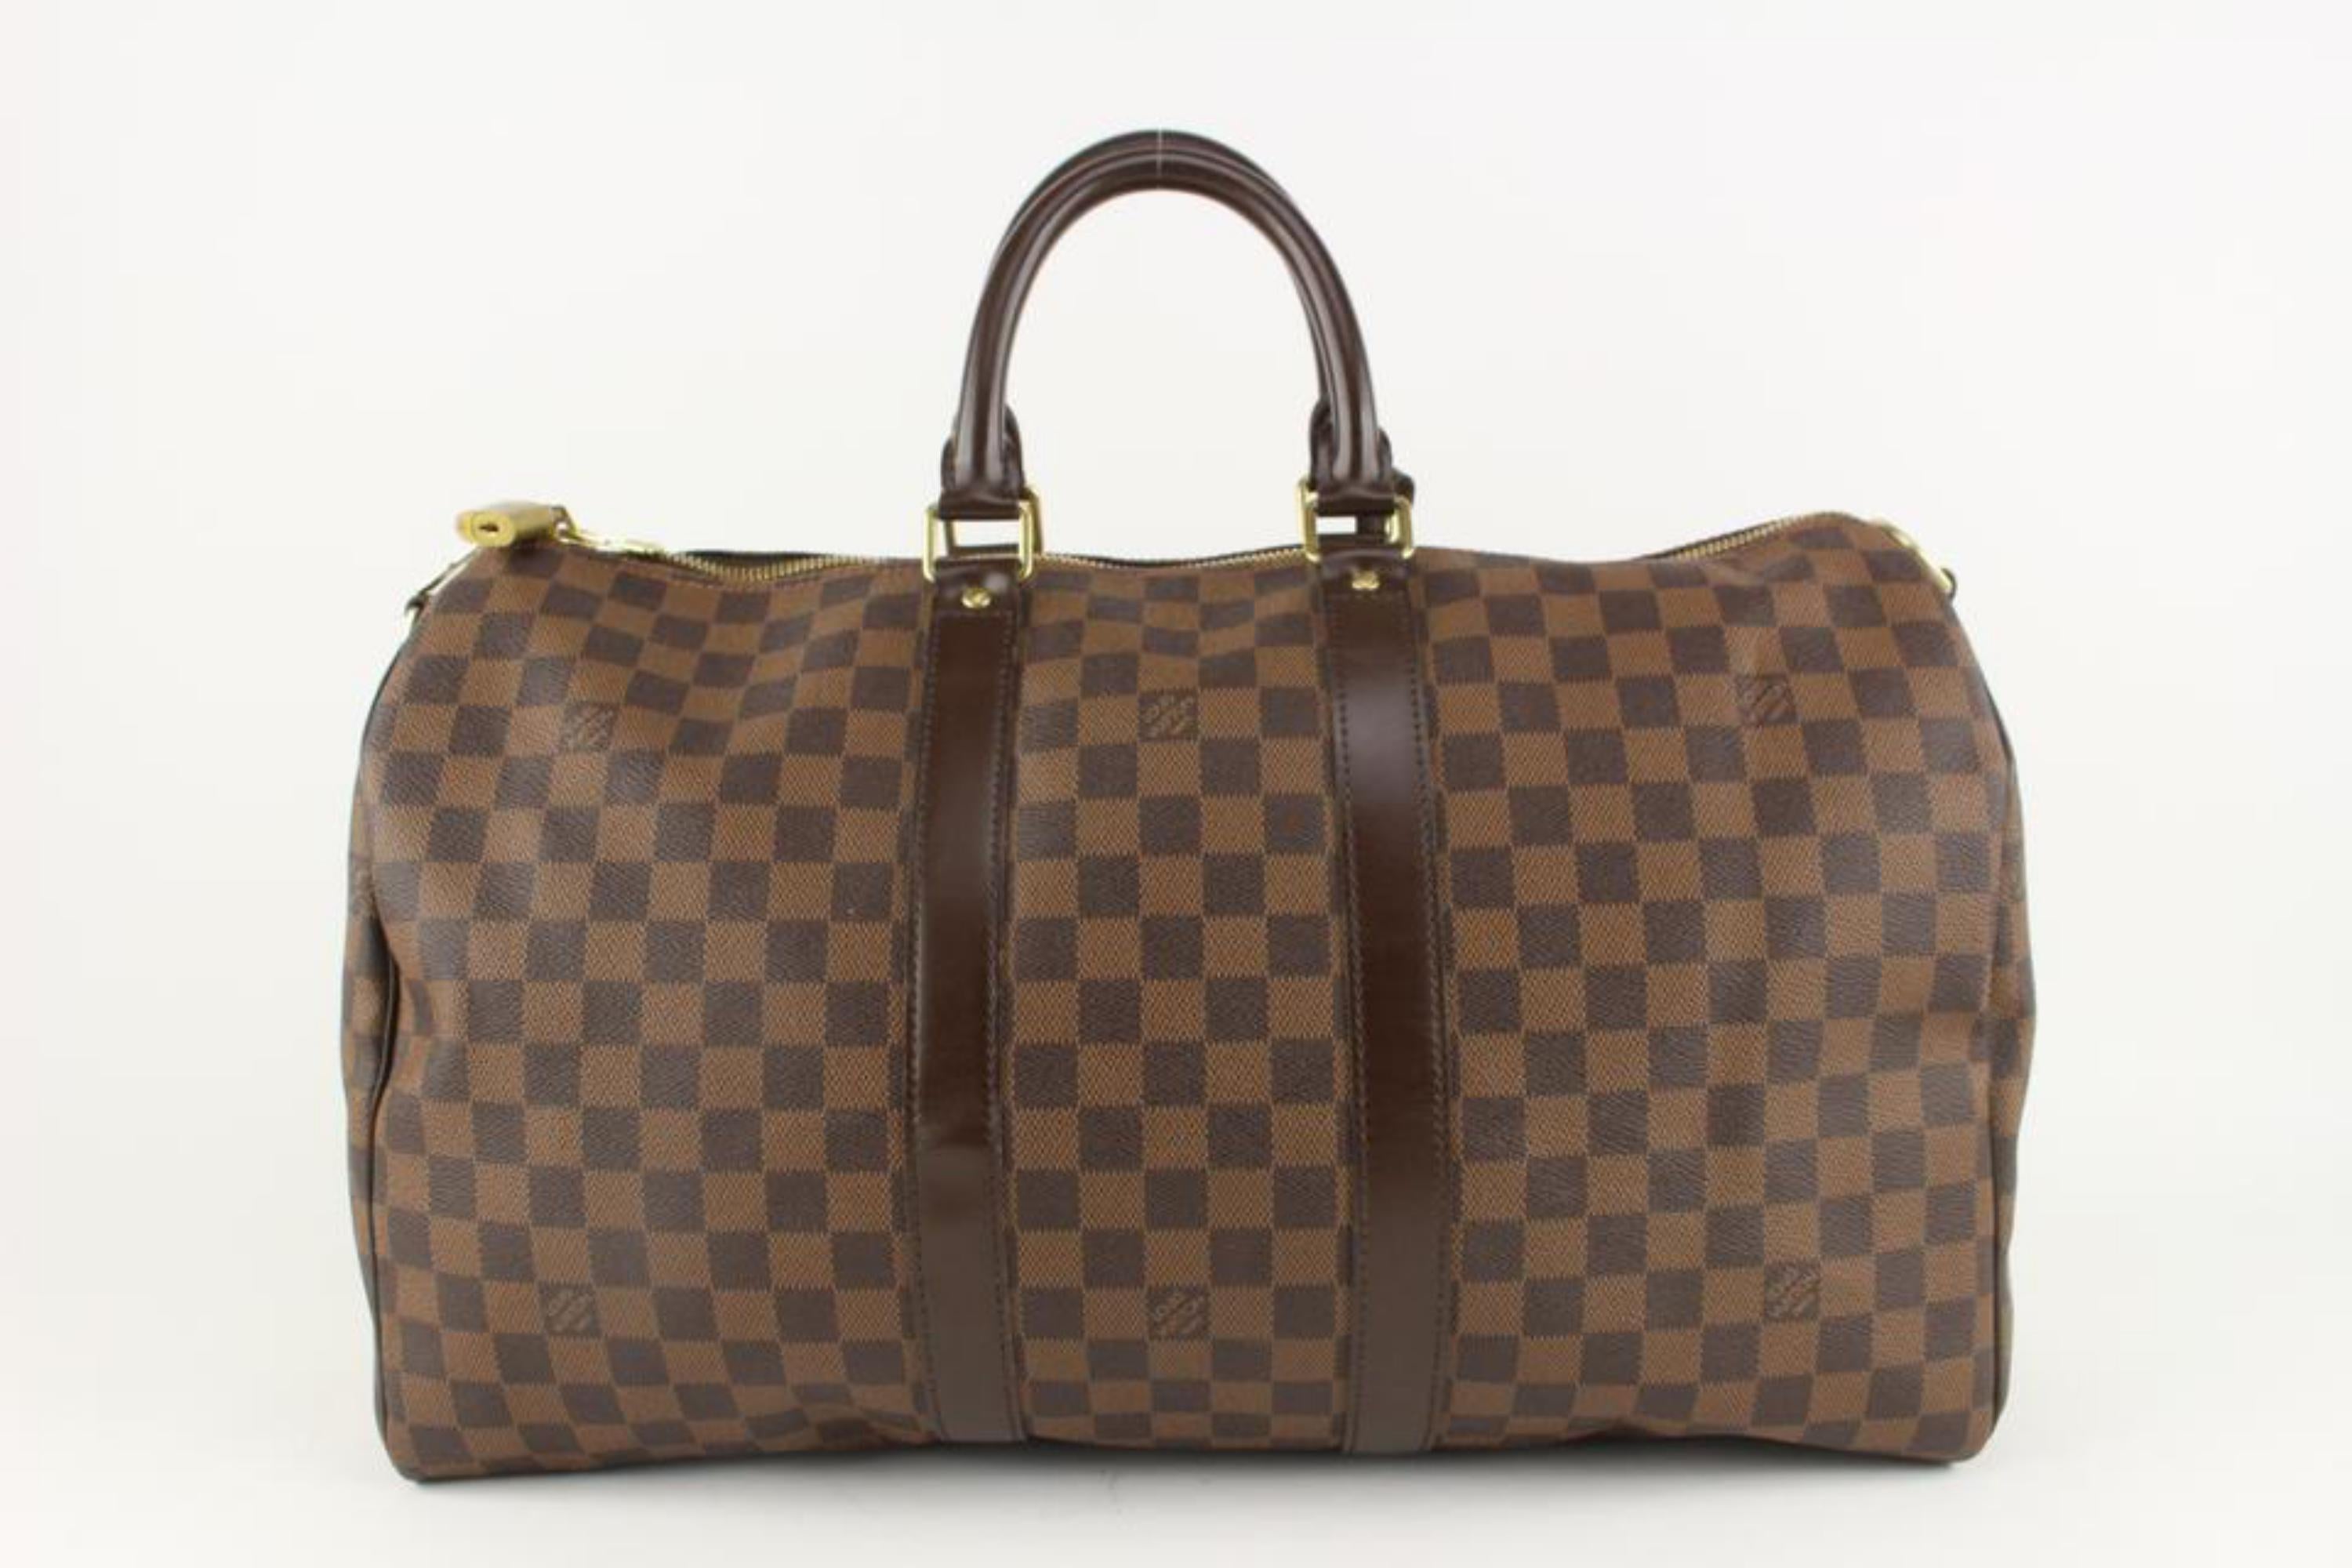 Louis Vuitton Damier Ebene Keepall 45 Boston Duffle Bag 1112lv53 In Excellent Condition In Dix hills, NY